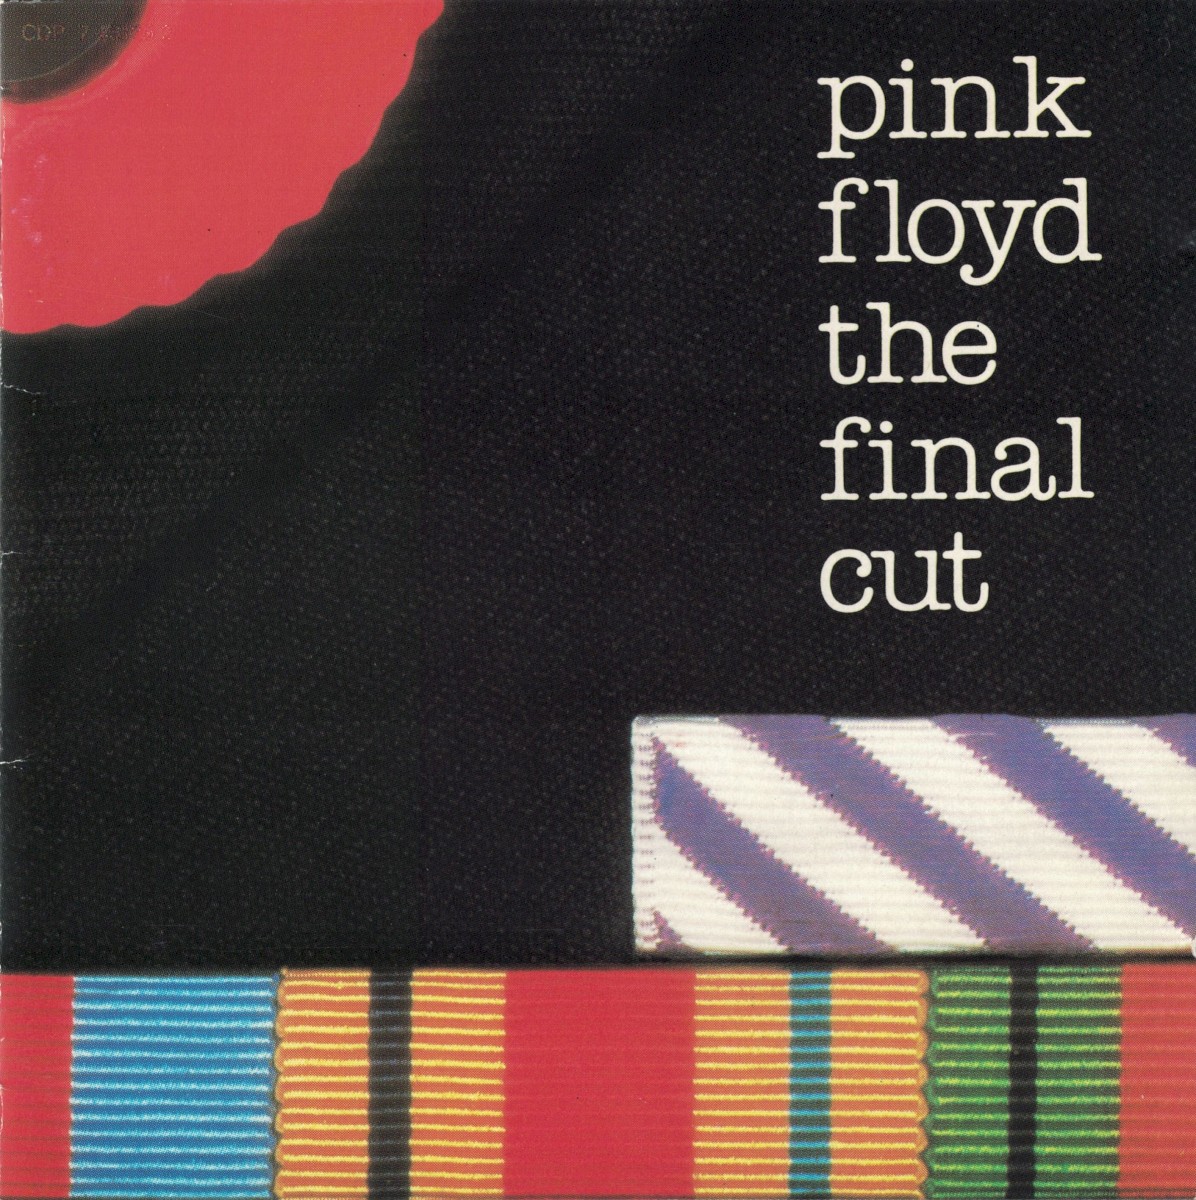 Release “The Final Cut” by Pink Floyd - Cover art - MusicBrainz